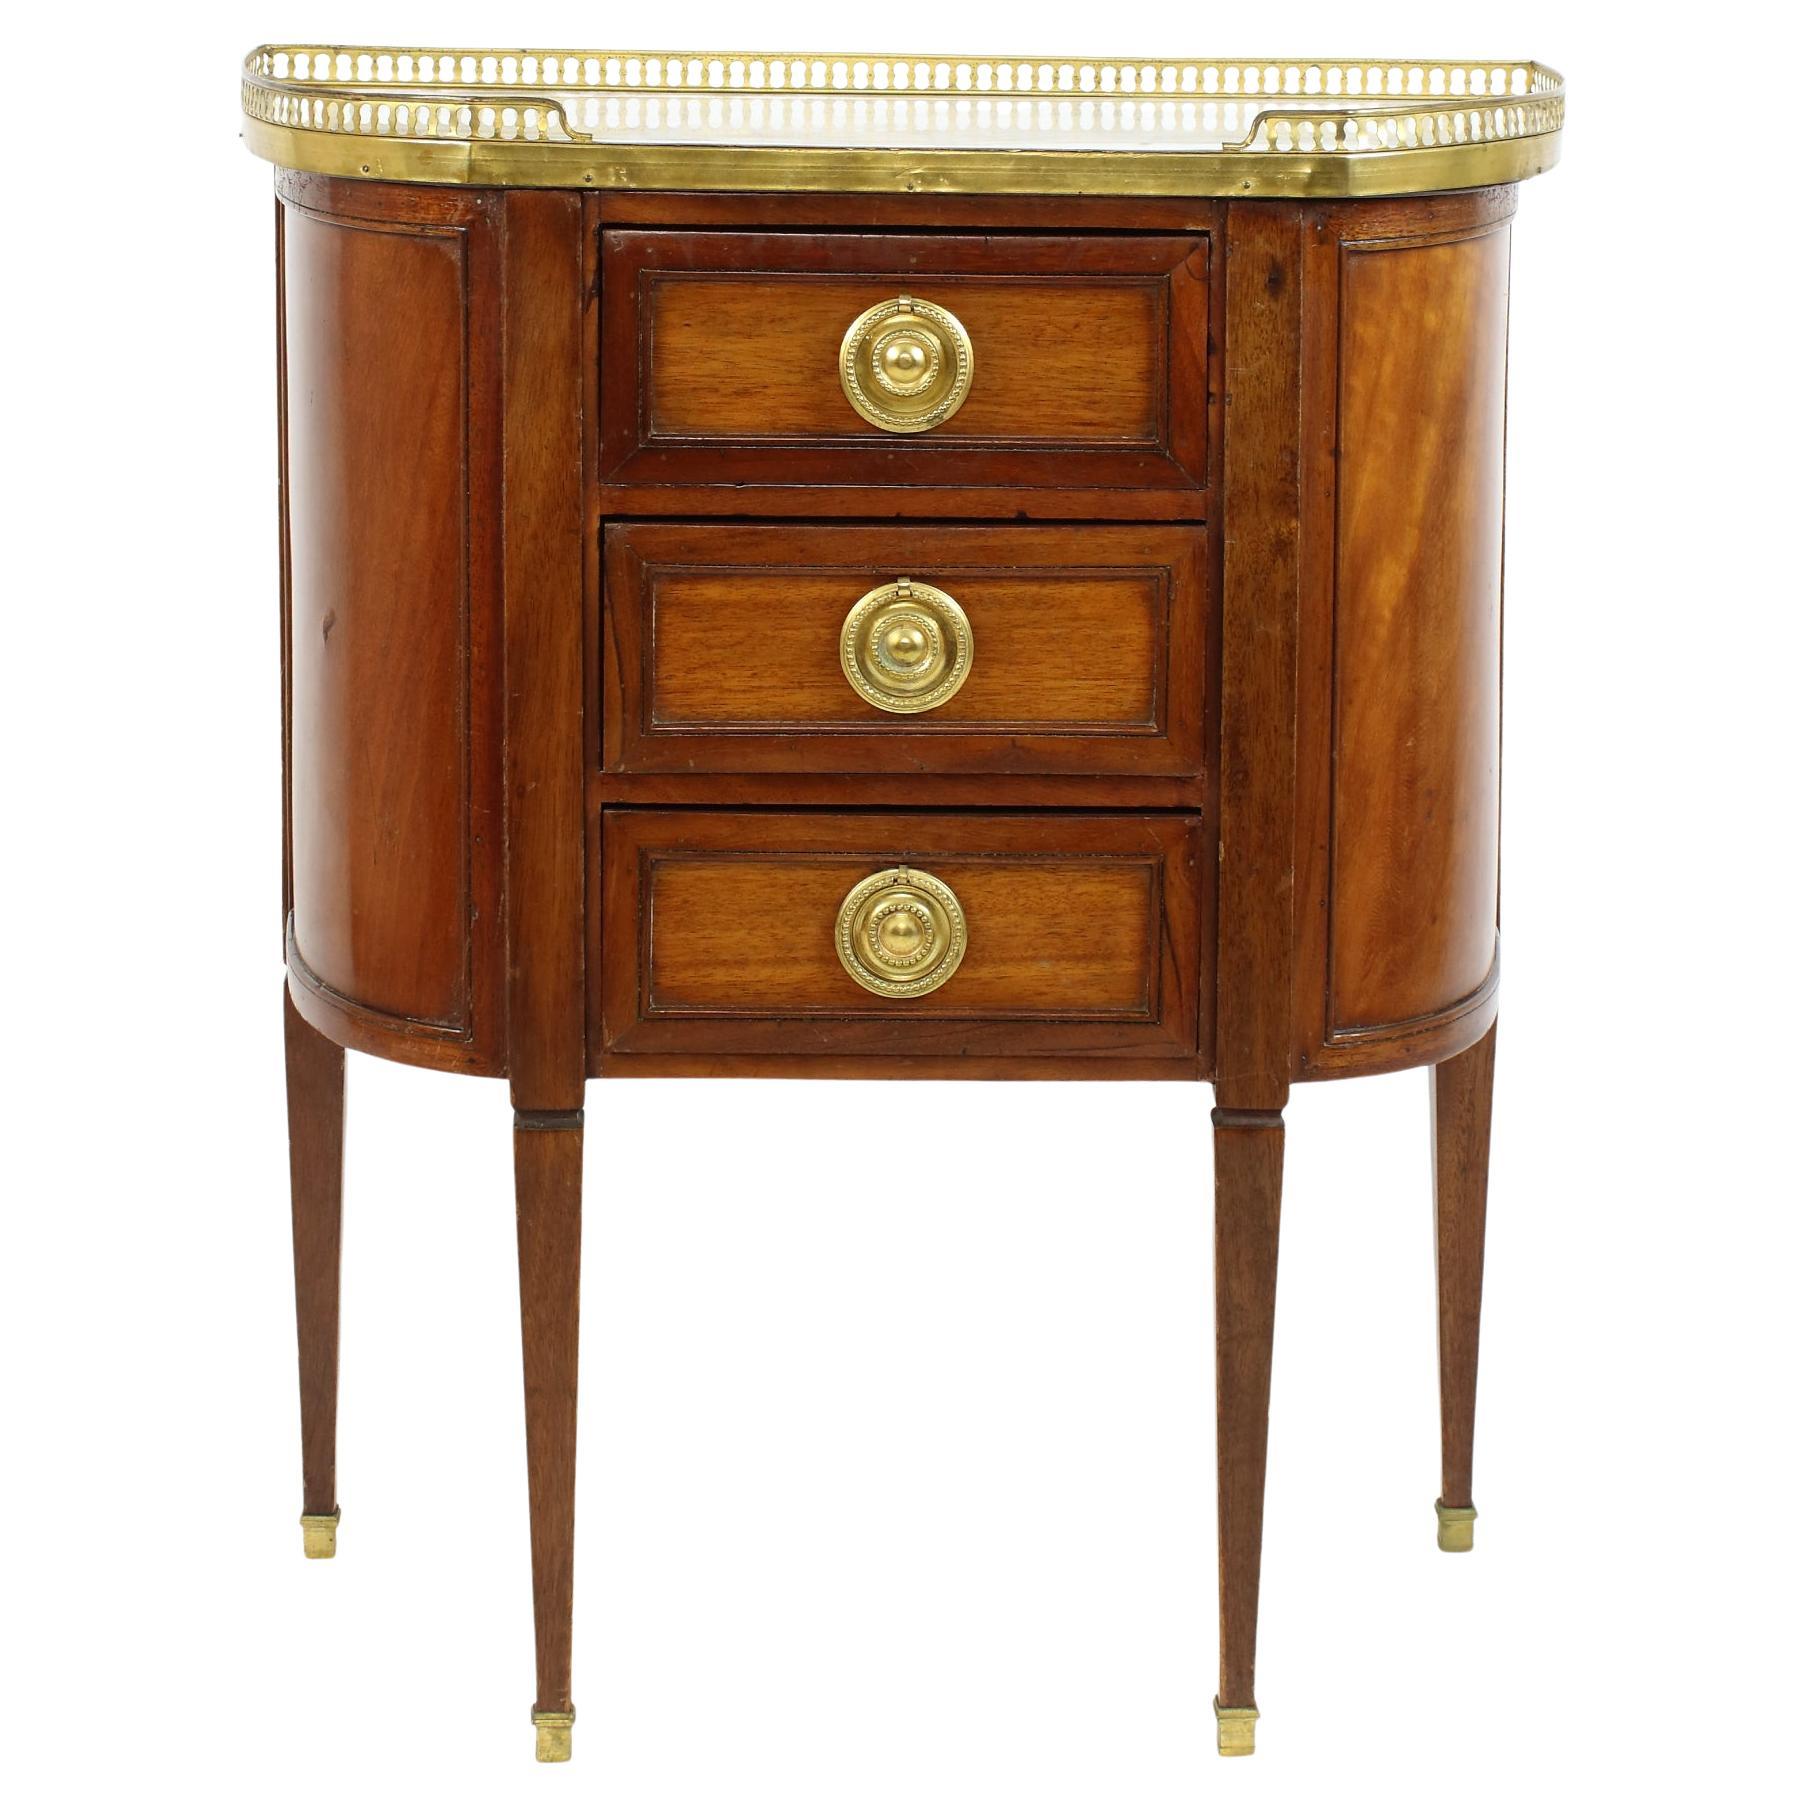 Late 18th Century Louis XVI Walnut Demilune Commode or Table Chiffonière